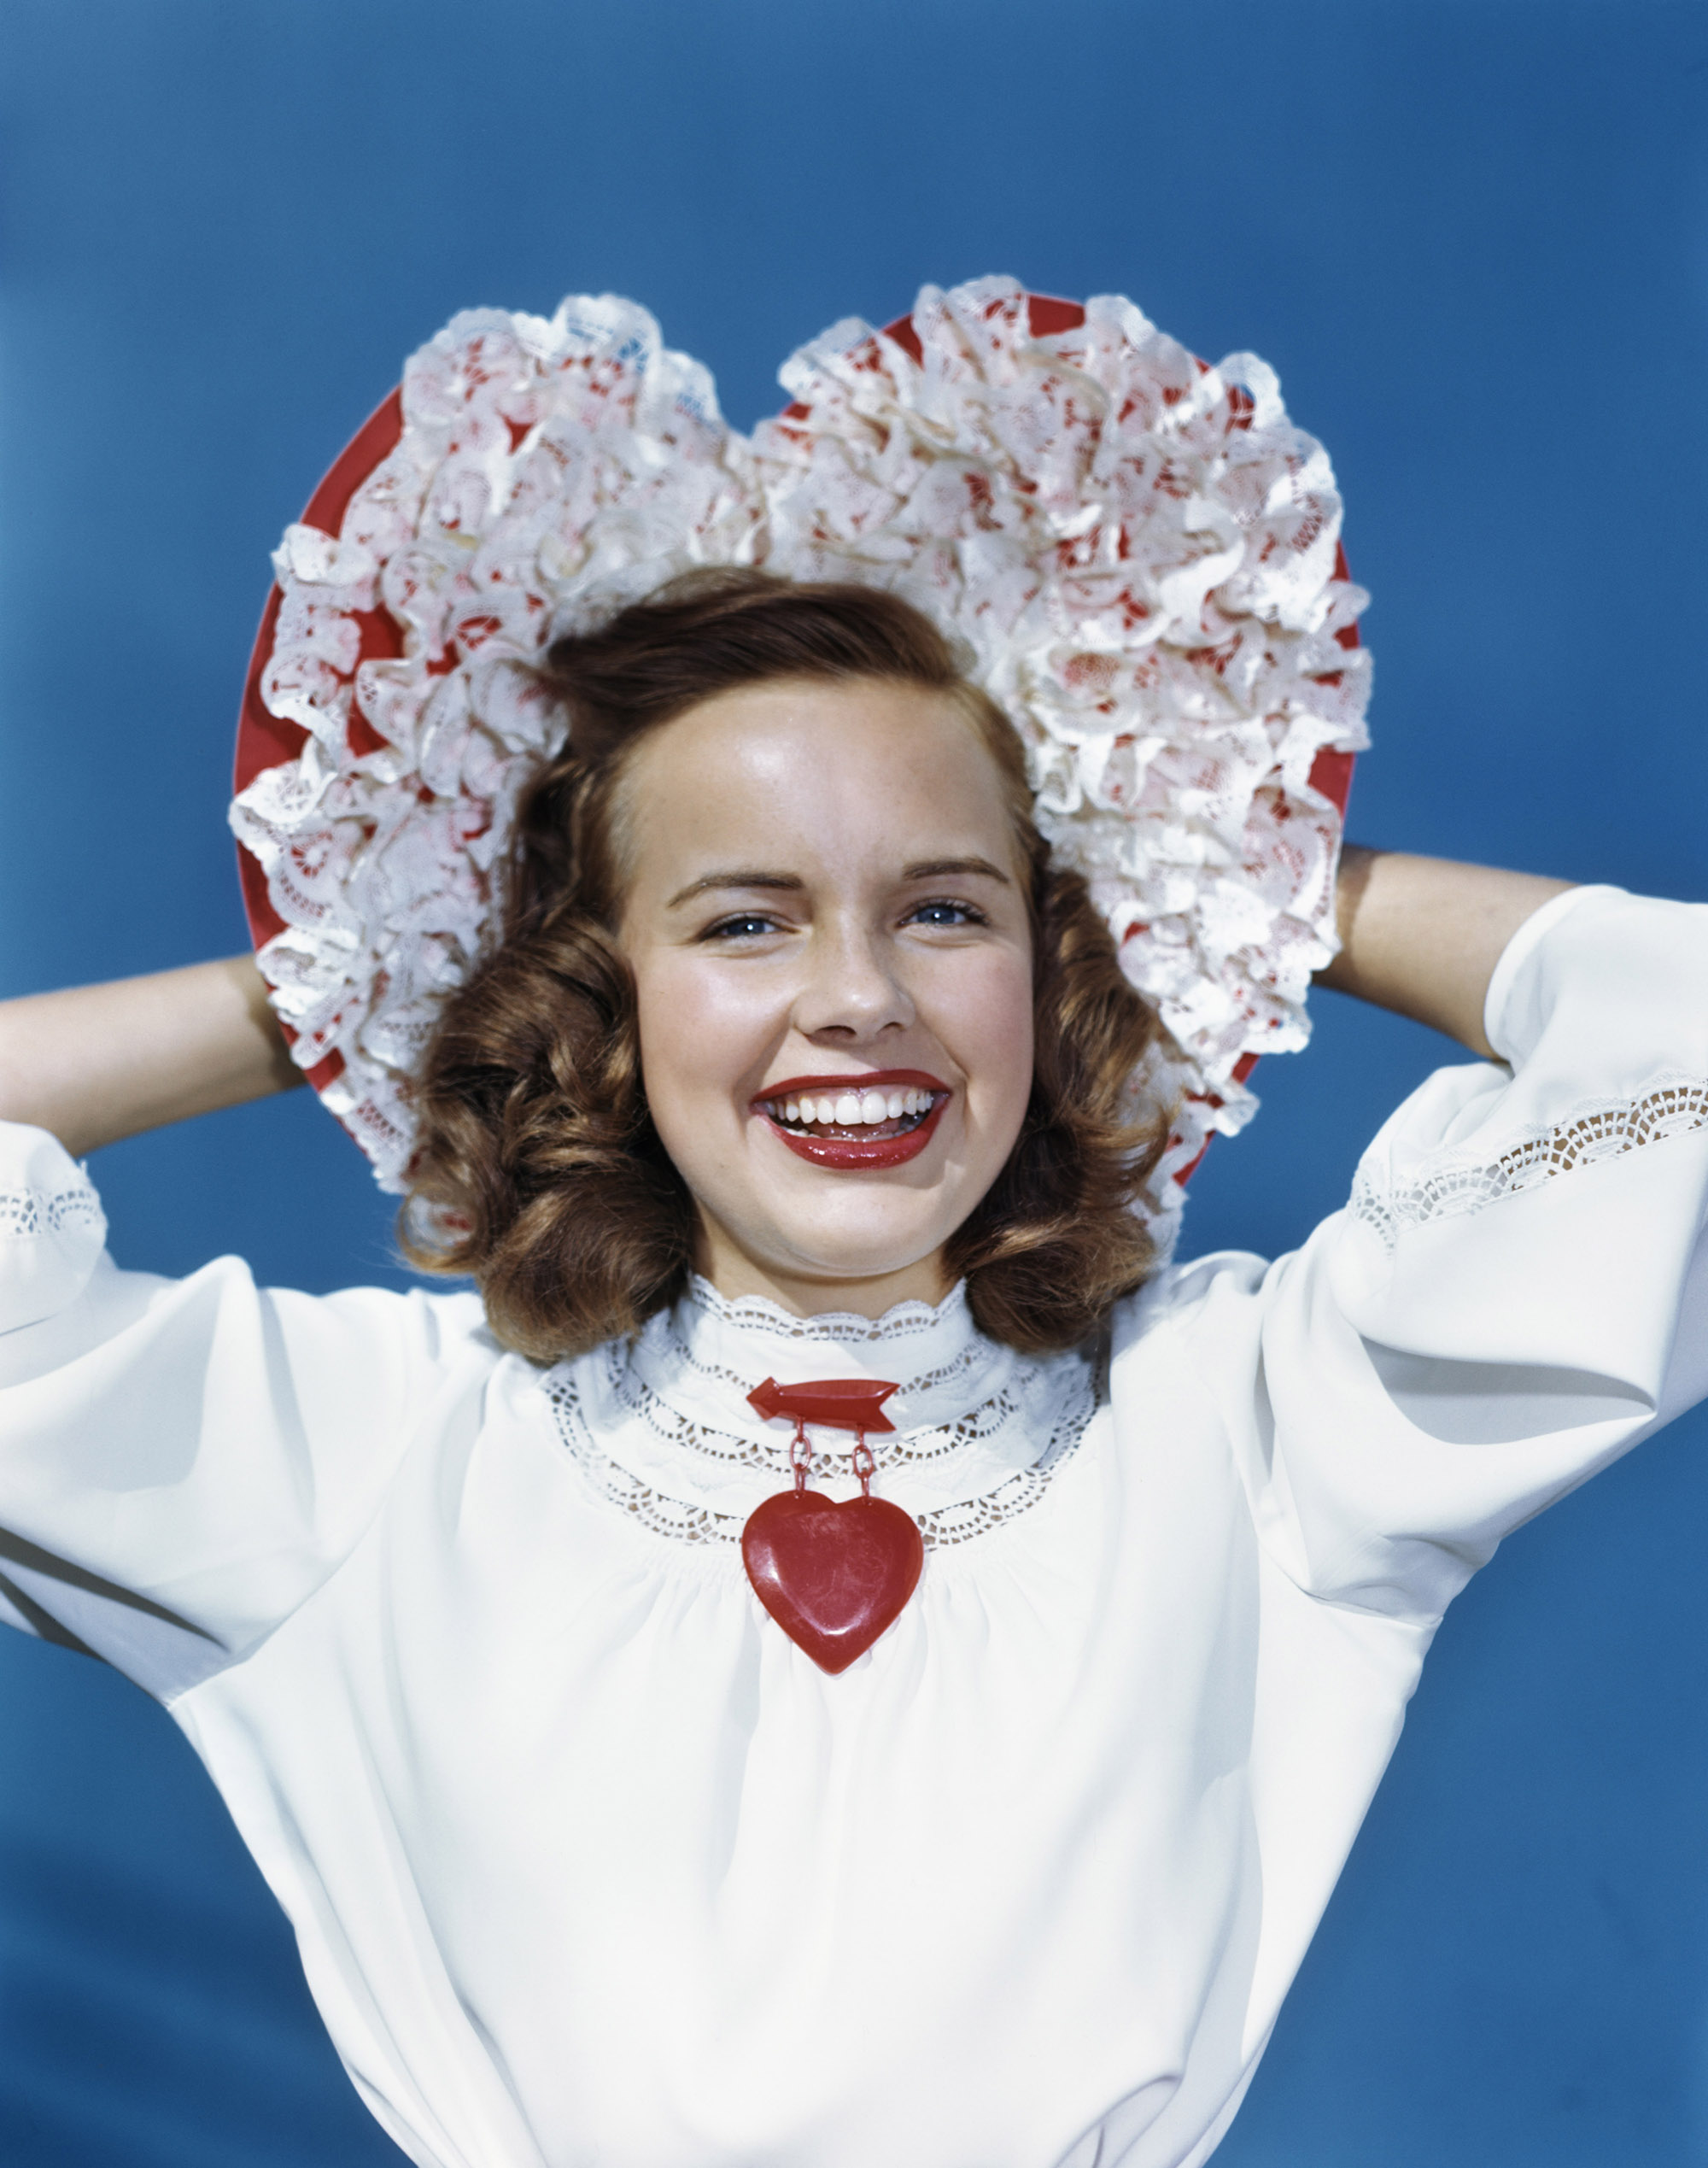 Actress Terry Moore, standing against a light blue background, wears a white blouse, red heart brooch and a white-and-red heart-shaped bonnet as she smiles in a 1949 Valentine's Day studio portrait.